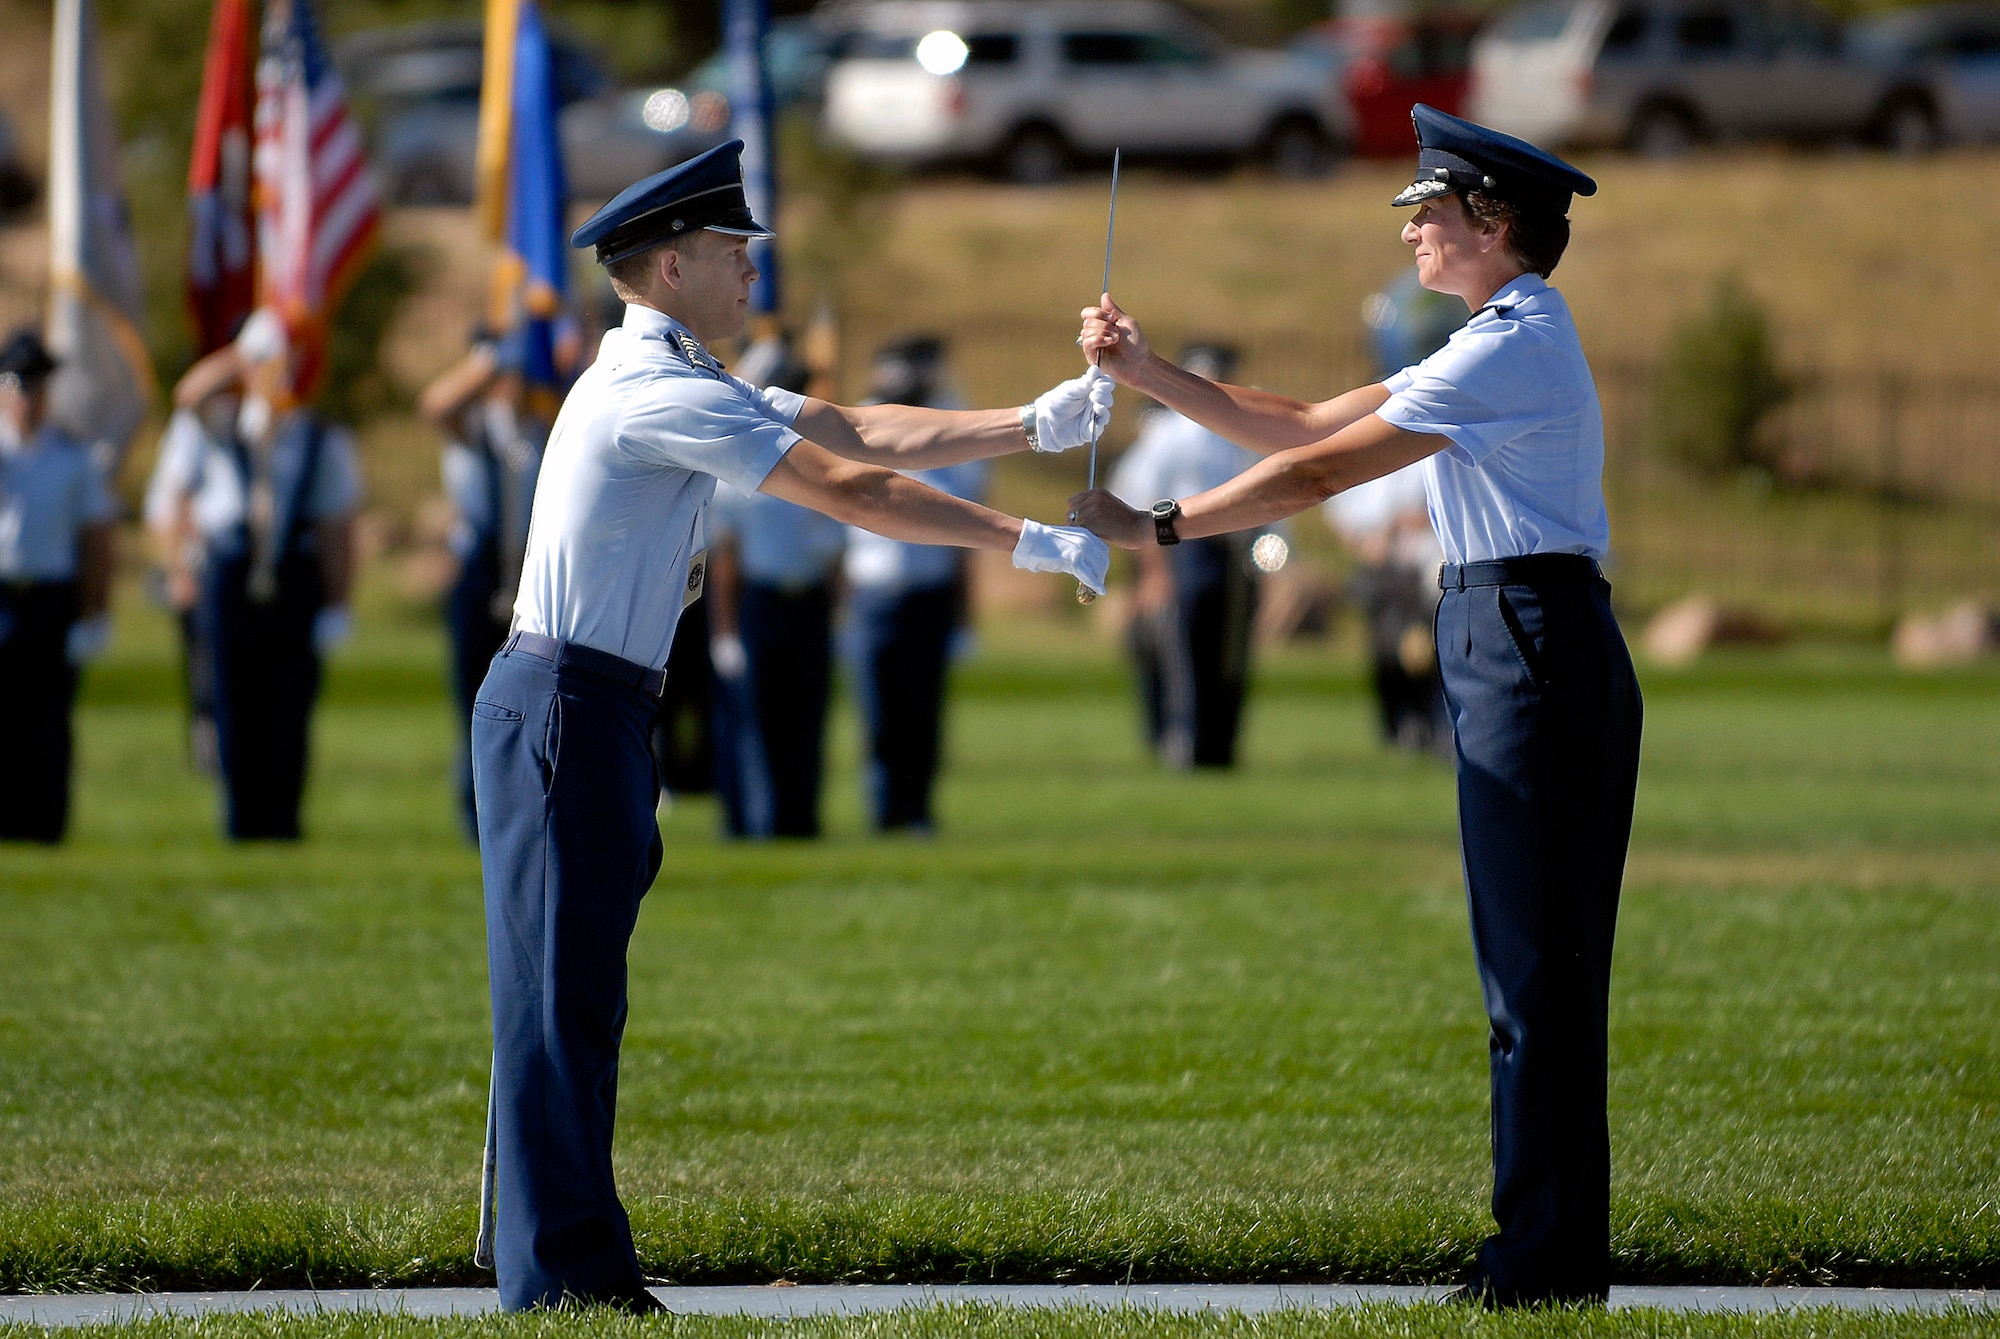 During the cadet change of command ceremony at the U.S. Air Force Academy, Fall commander Cadet 1st Class Jacob Schonig receives the saber from Commandant of Cadets Brig. Gen. Susan Desjardins Aug 6 on the Stillman Parade Field near Colorado Springs, Colo. (U.S Air Force photo/Mike Kaplan)